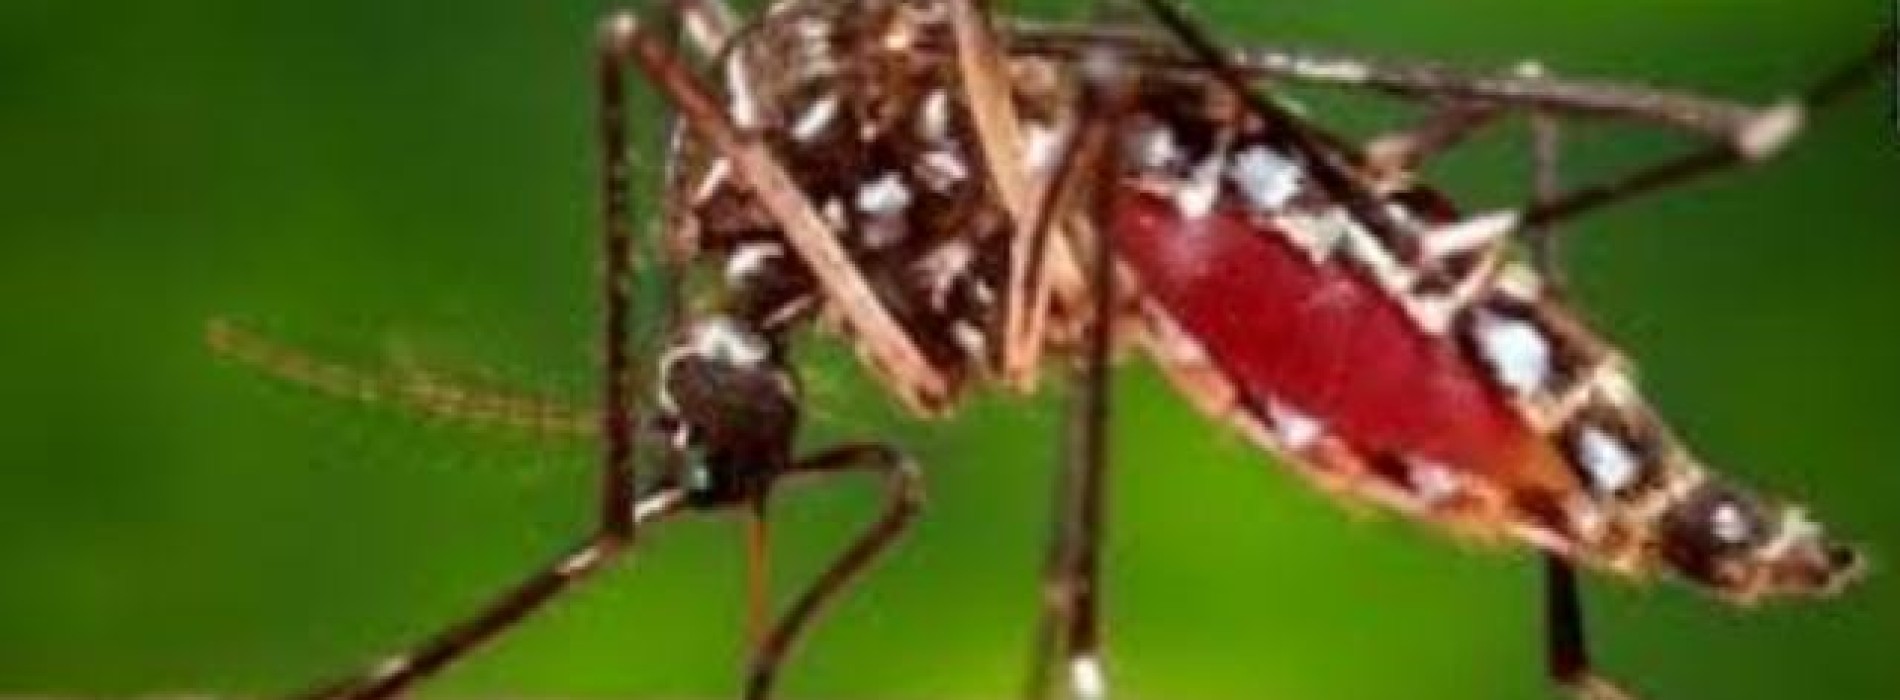 Experts call for effective mosquito control in Africa